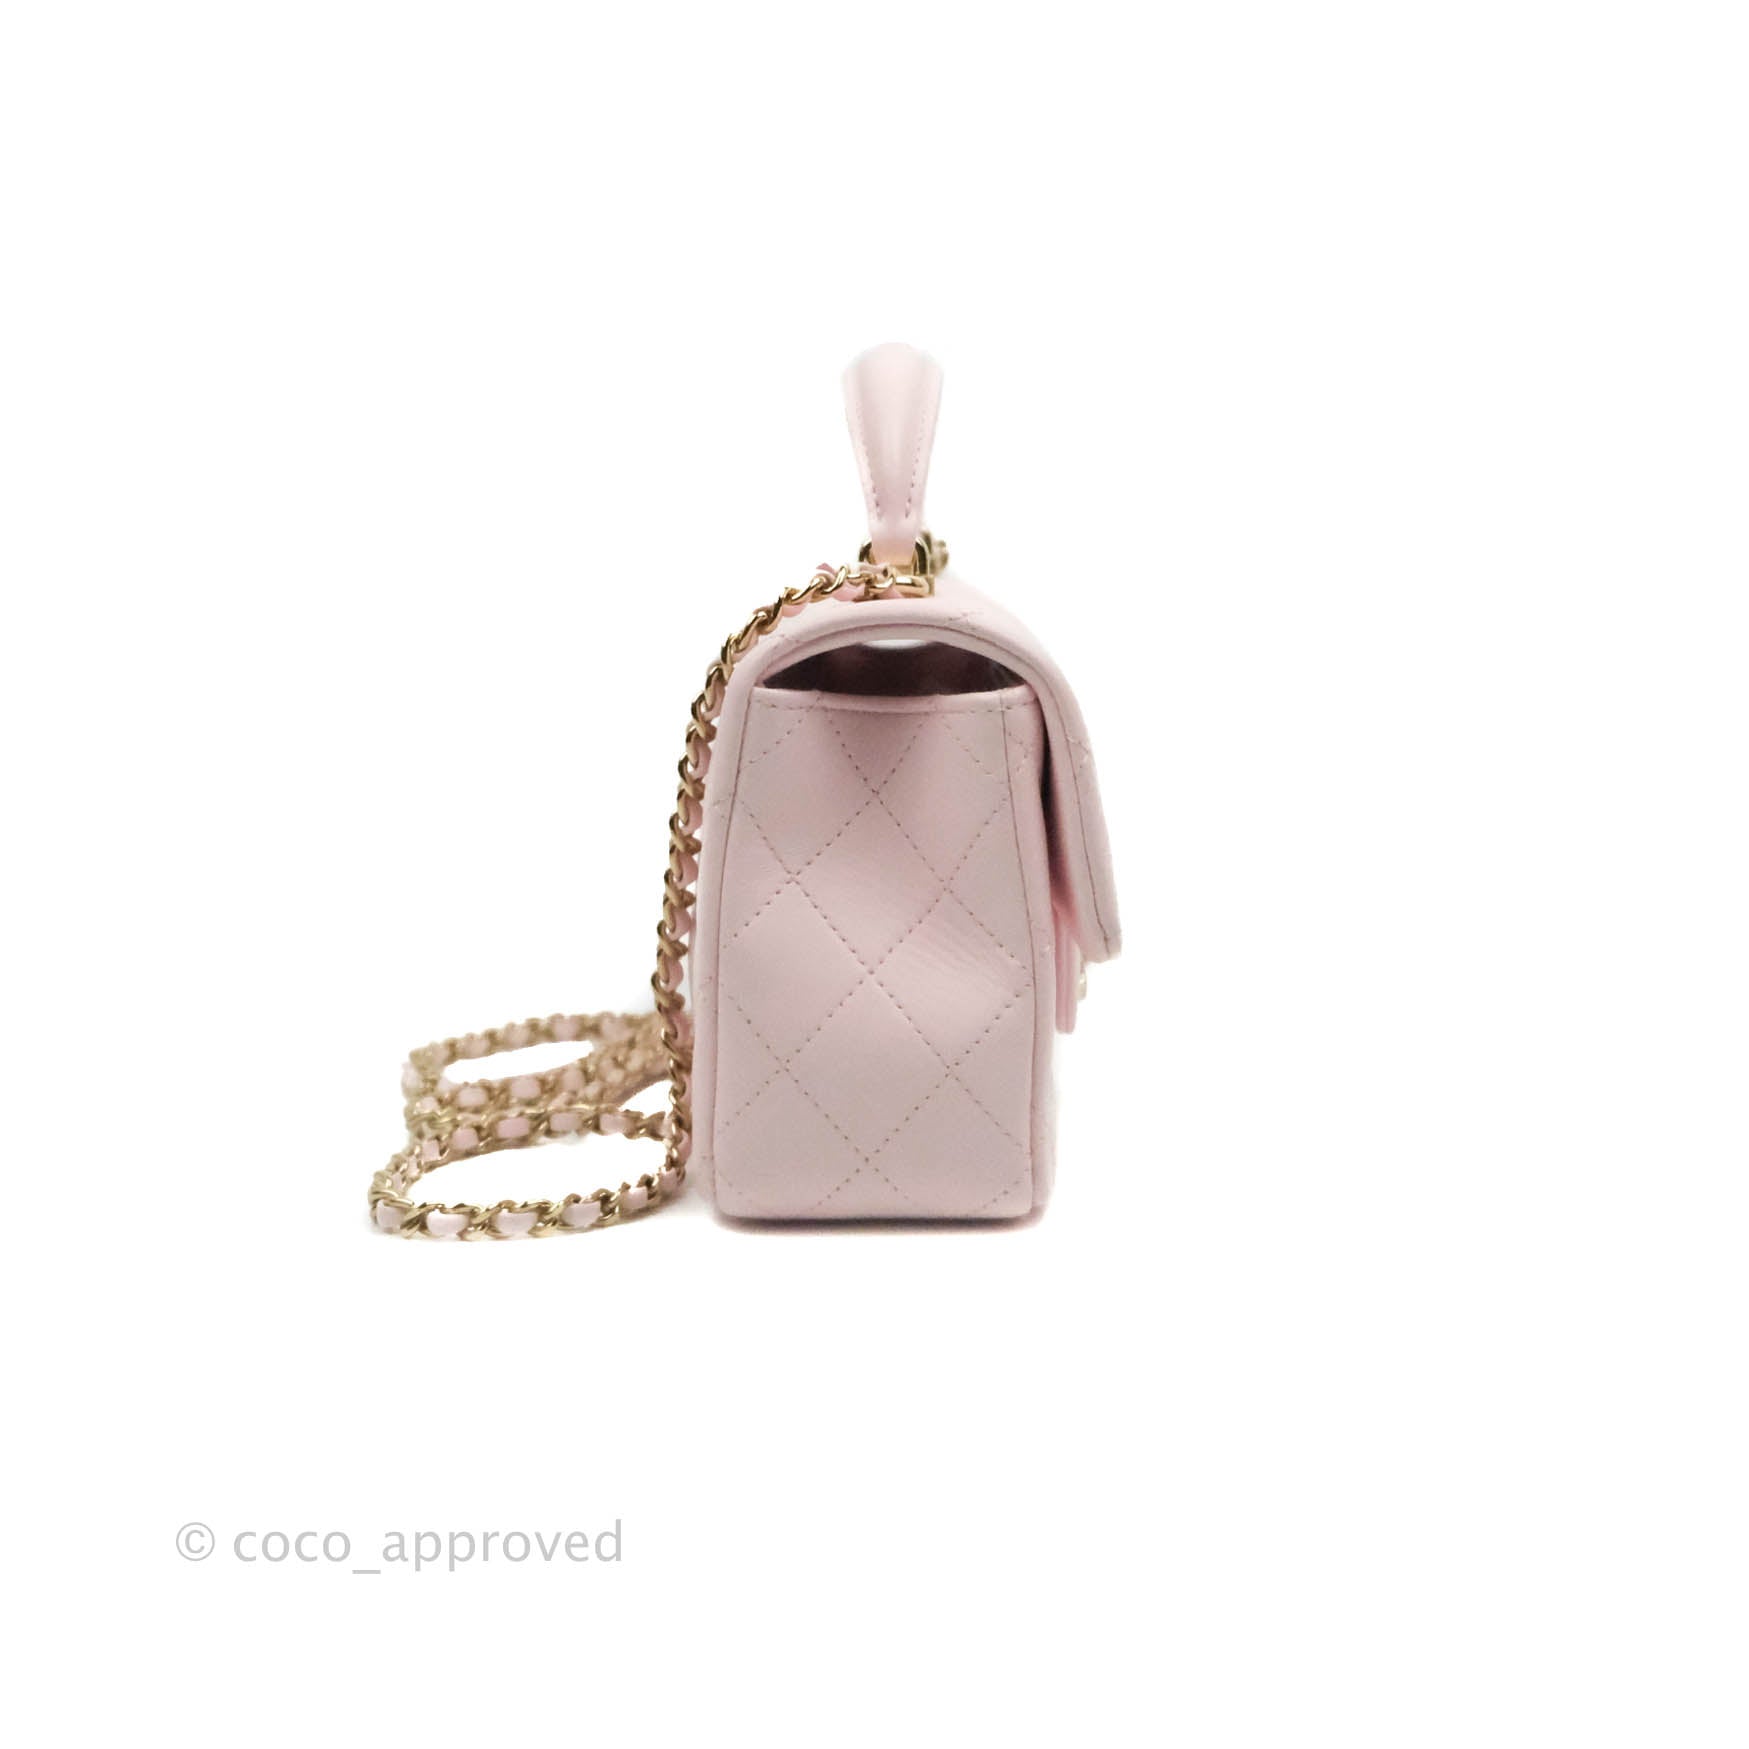 Chanel Mini Flap Bag With Top Handle Light Pink in Lambskin Leather - US